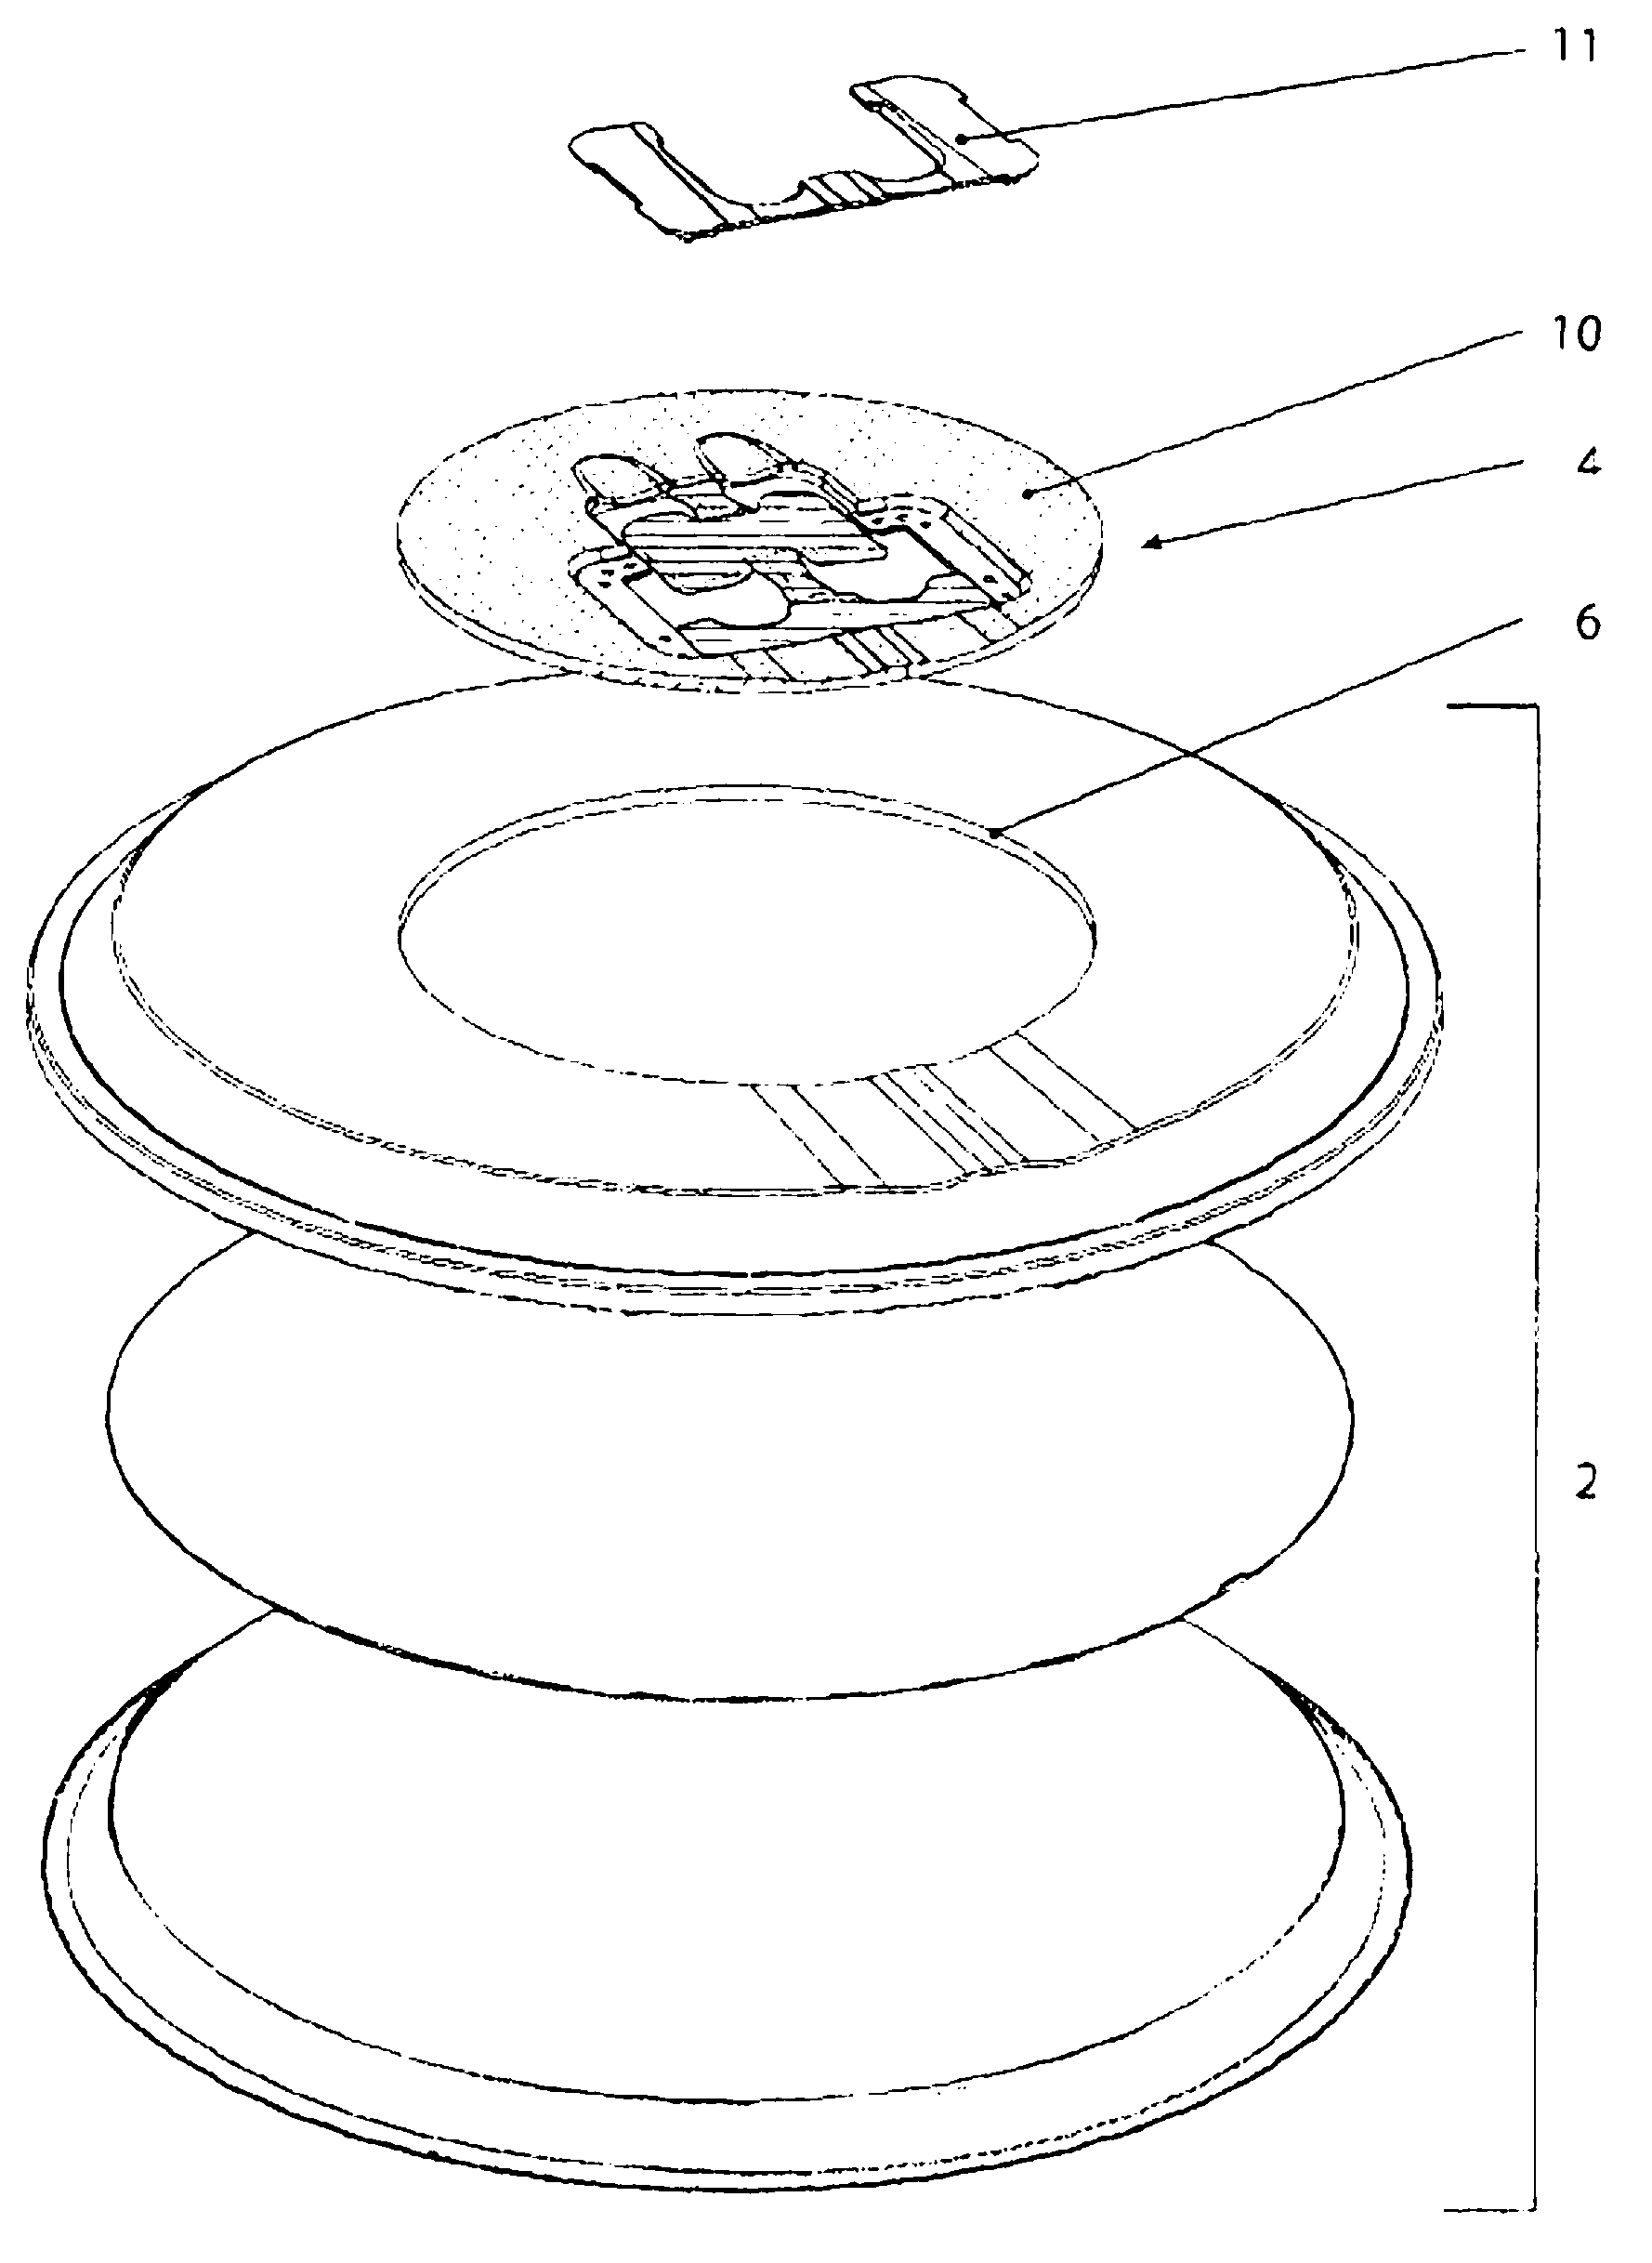 Tray and device for stabilising a tray